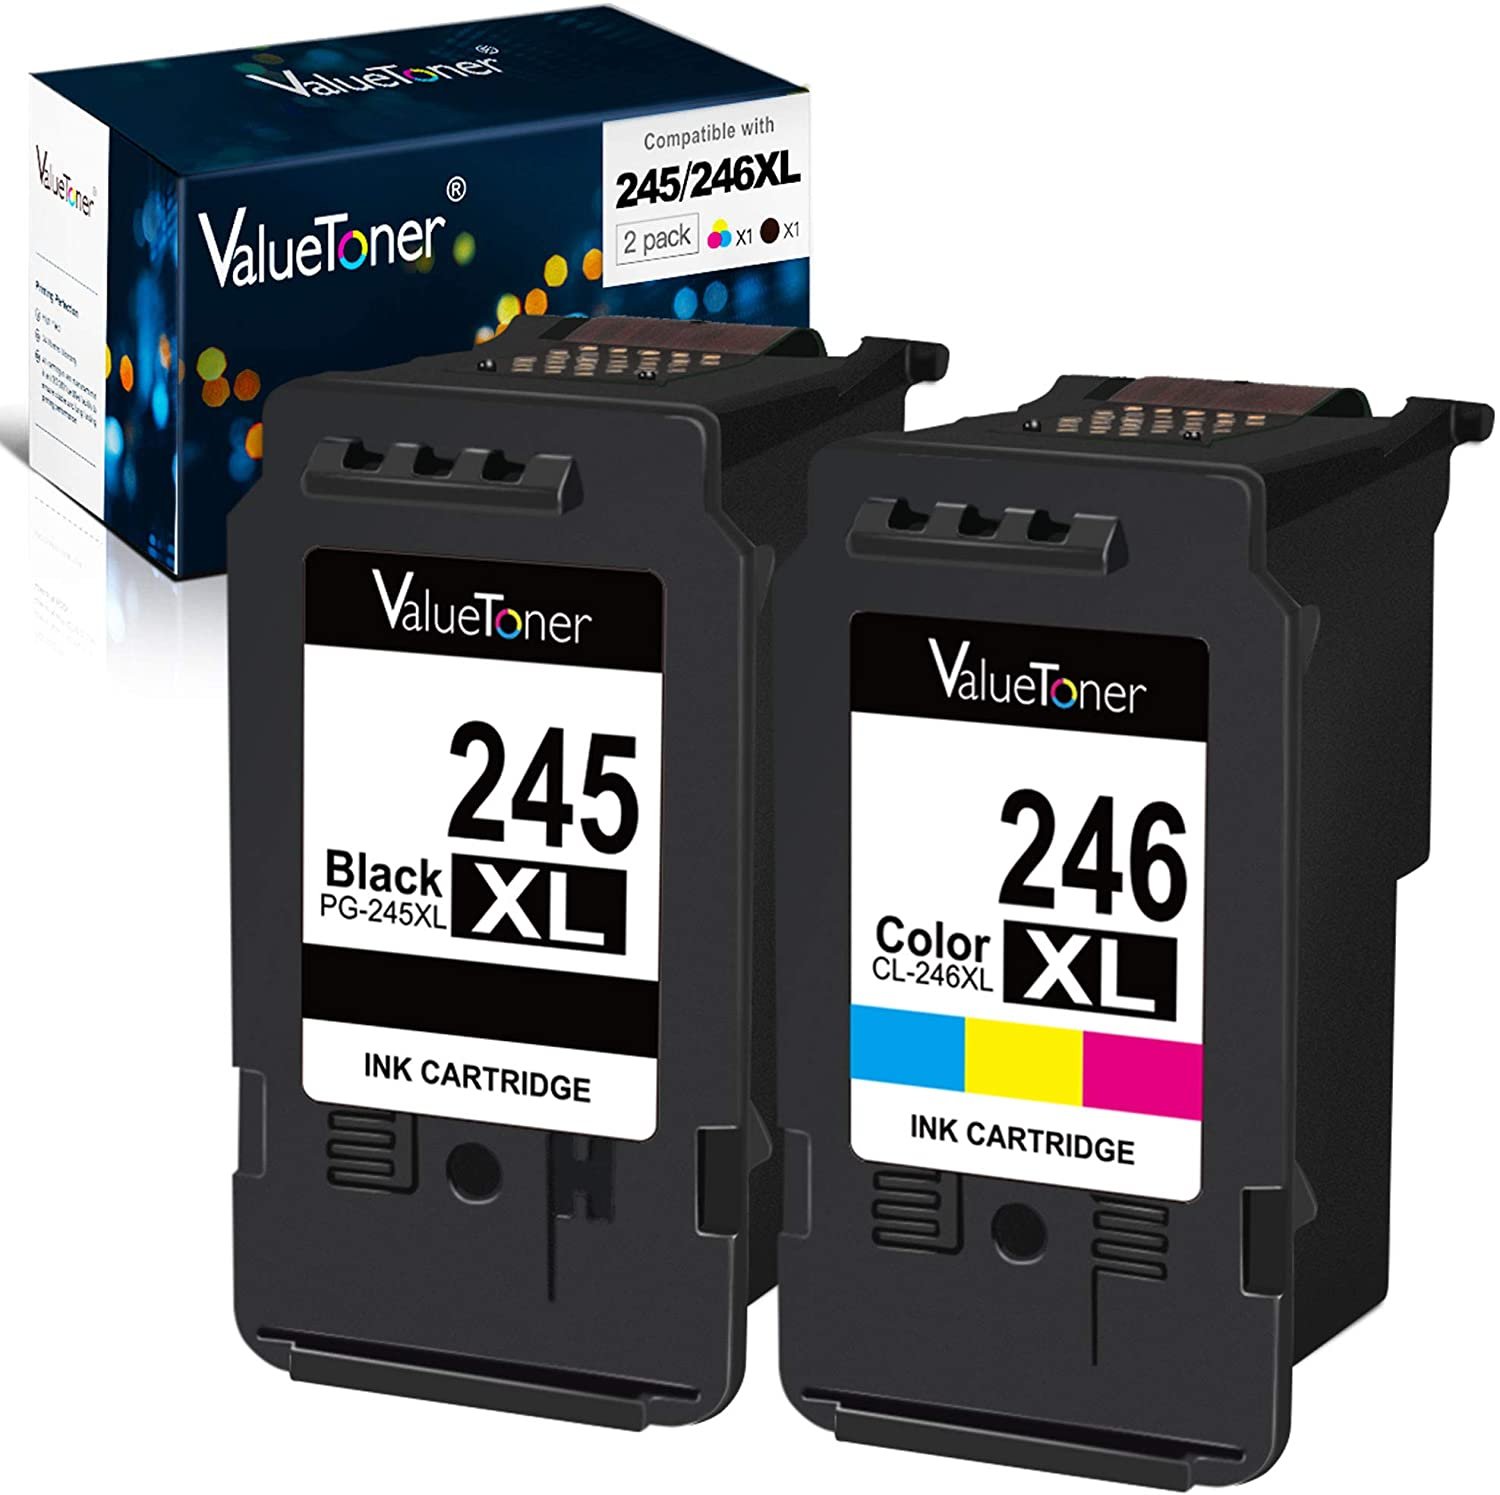 21% Off Valuetoner Ink Cartridge Replacement for Canon Printer (Copy)